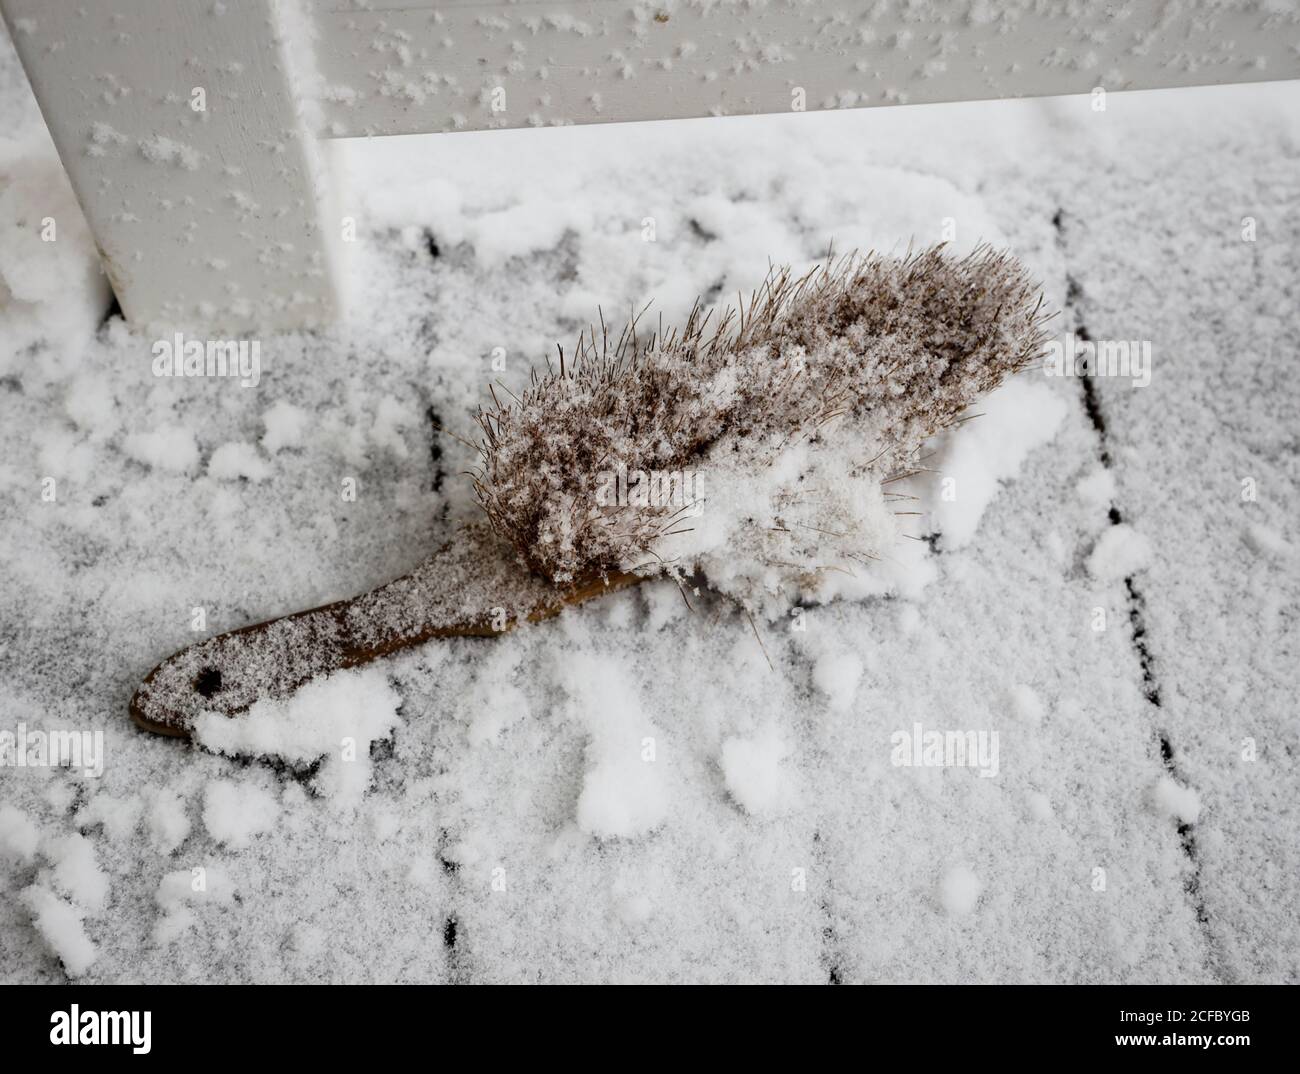 Hand broom in the snow on porch Stock Photo